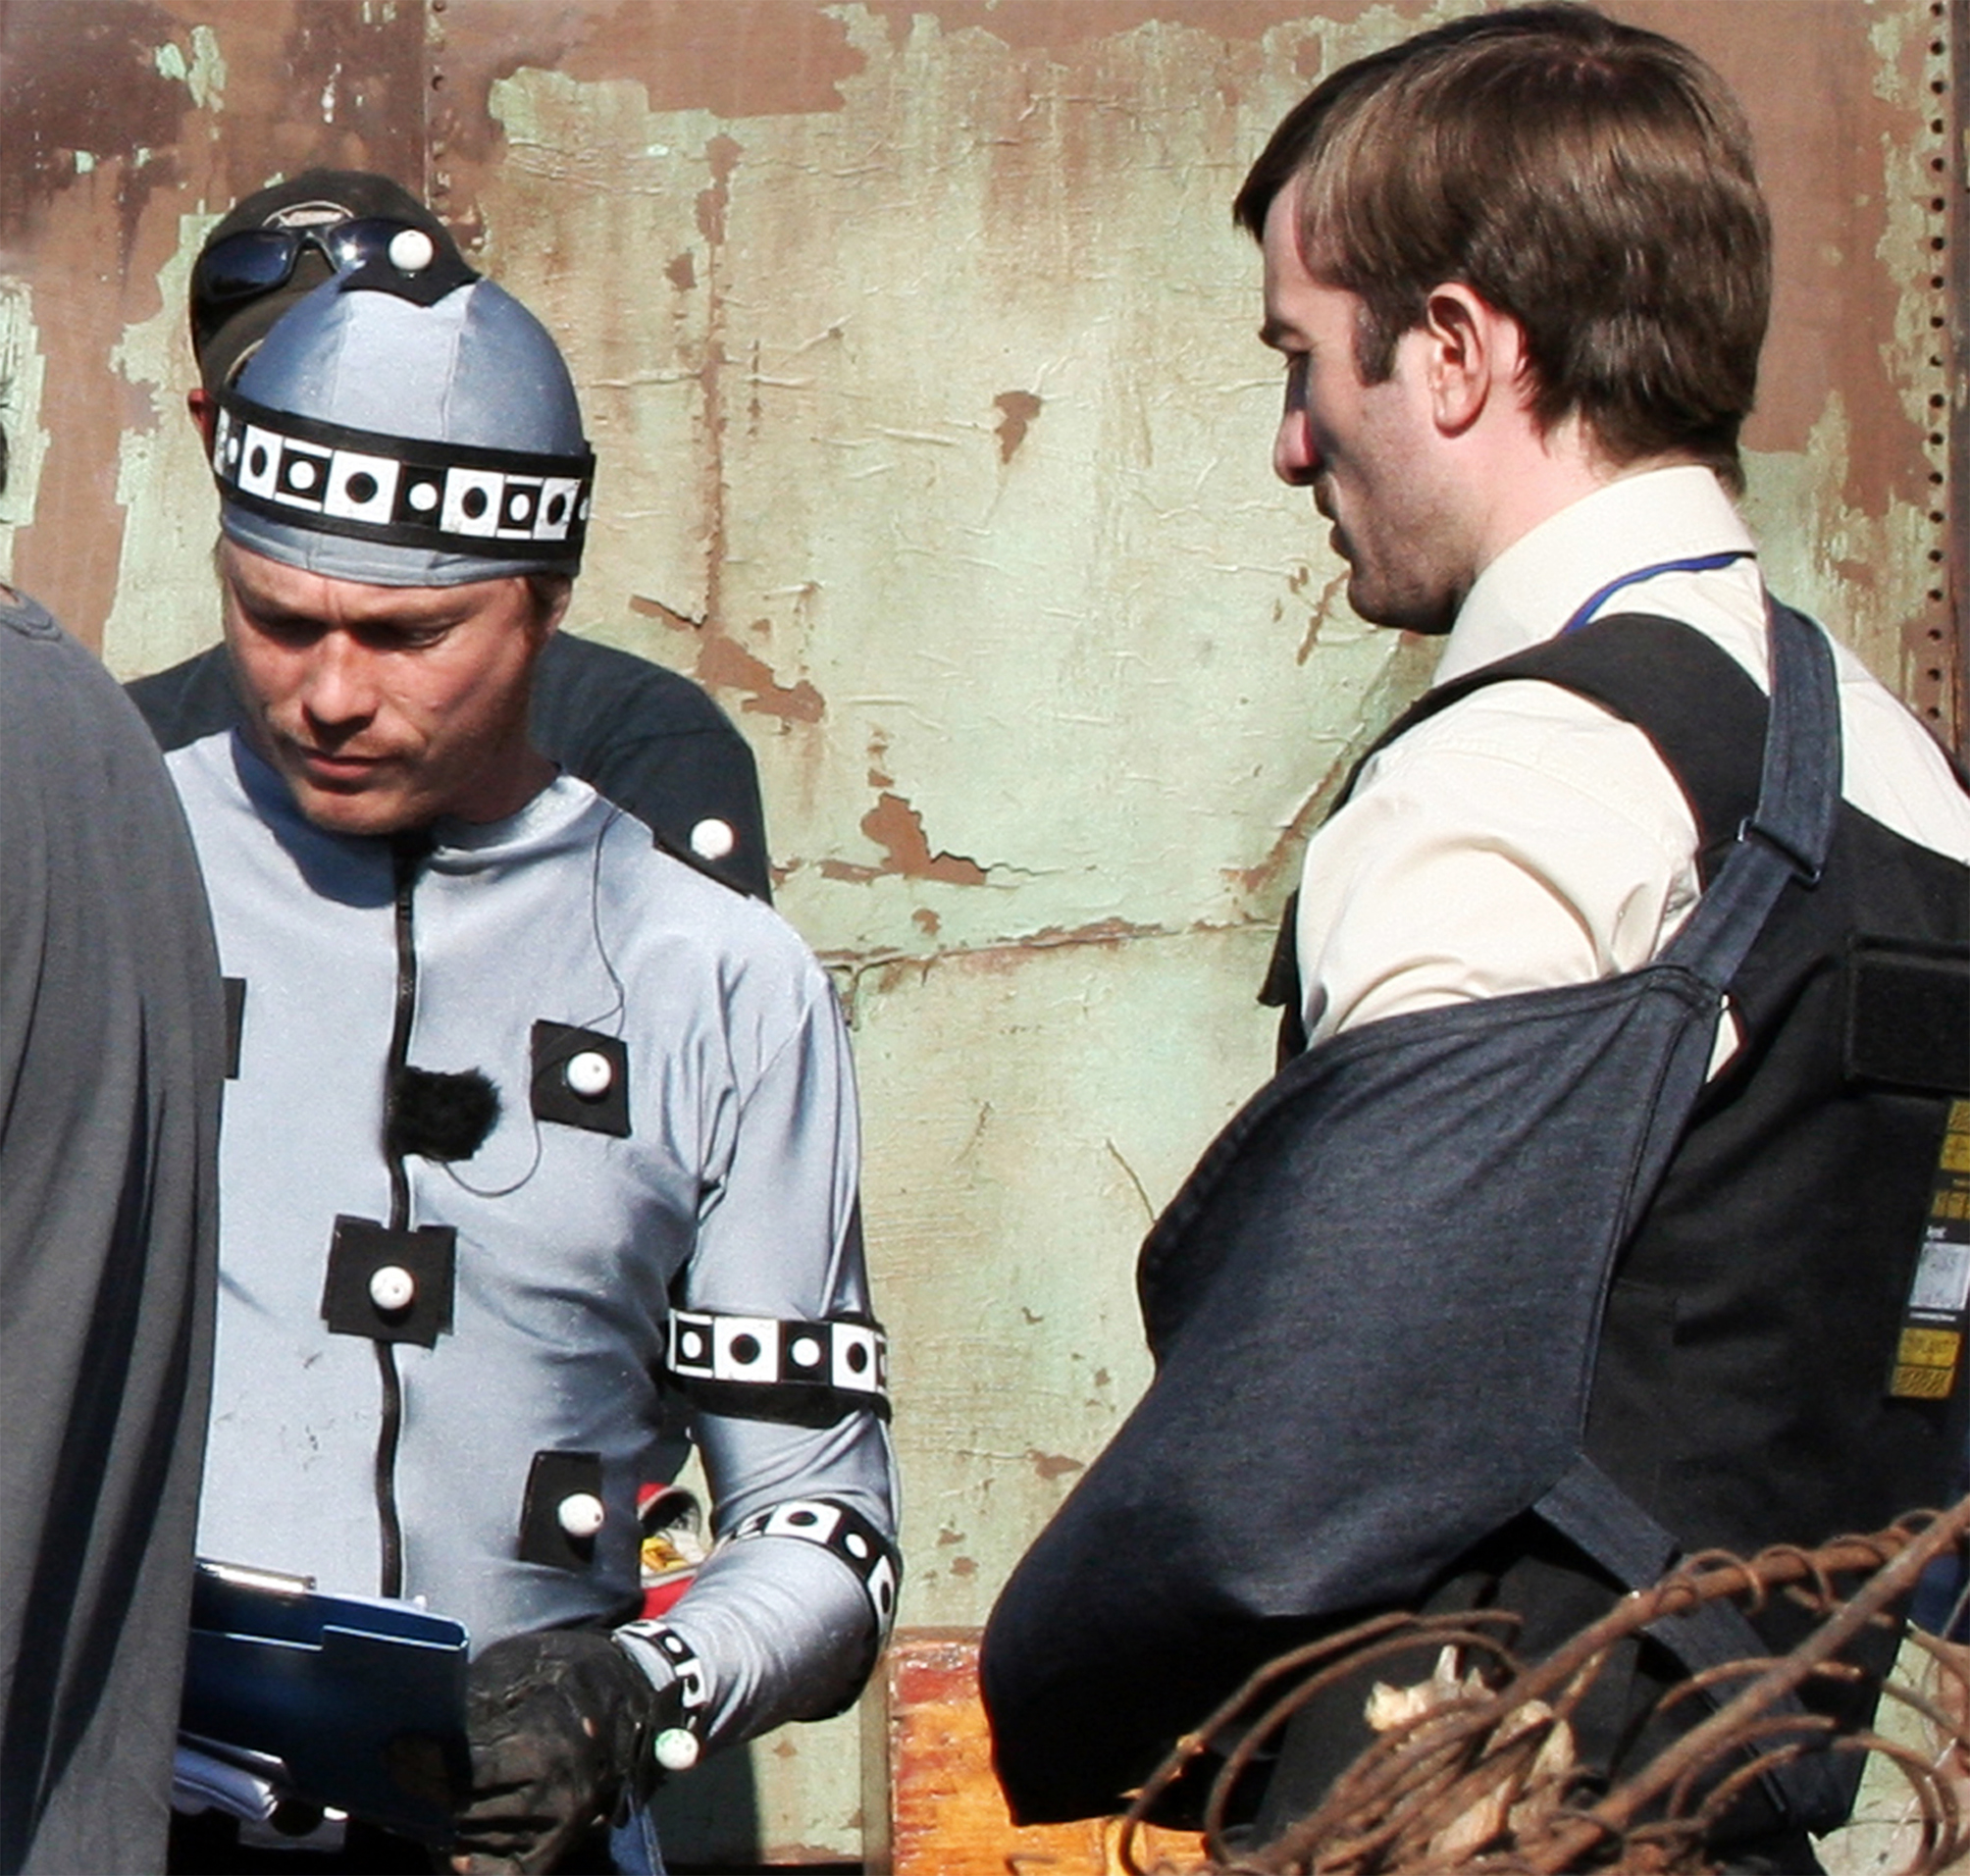 Jason Cope and Sharlto Copley on set District 9.